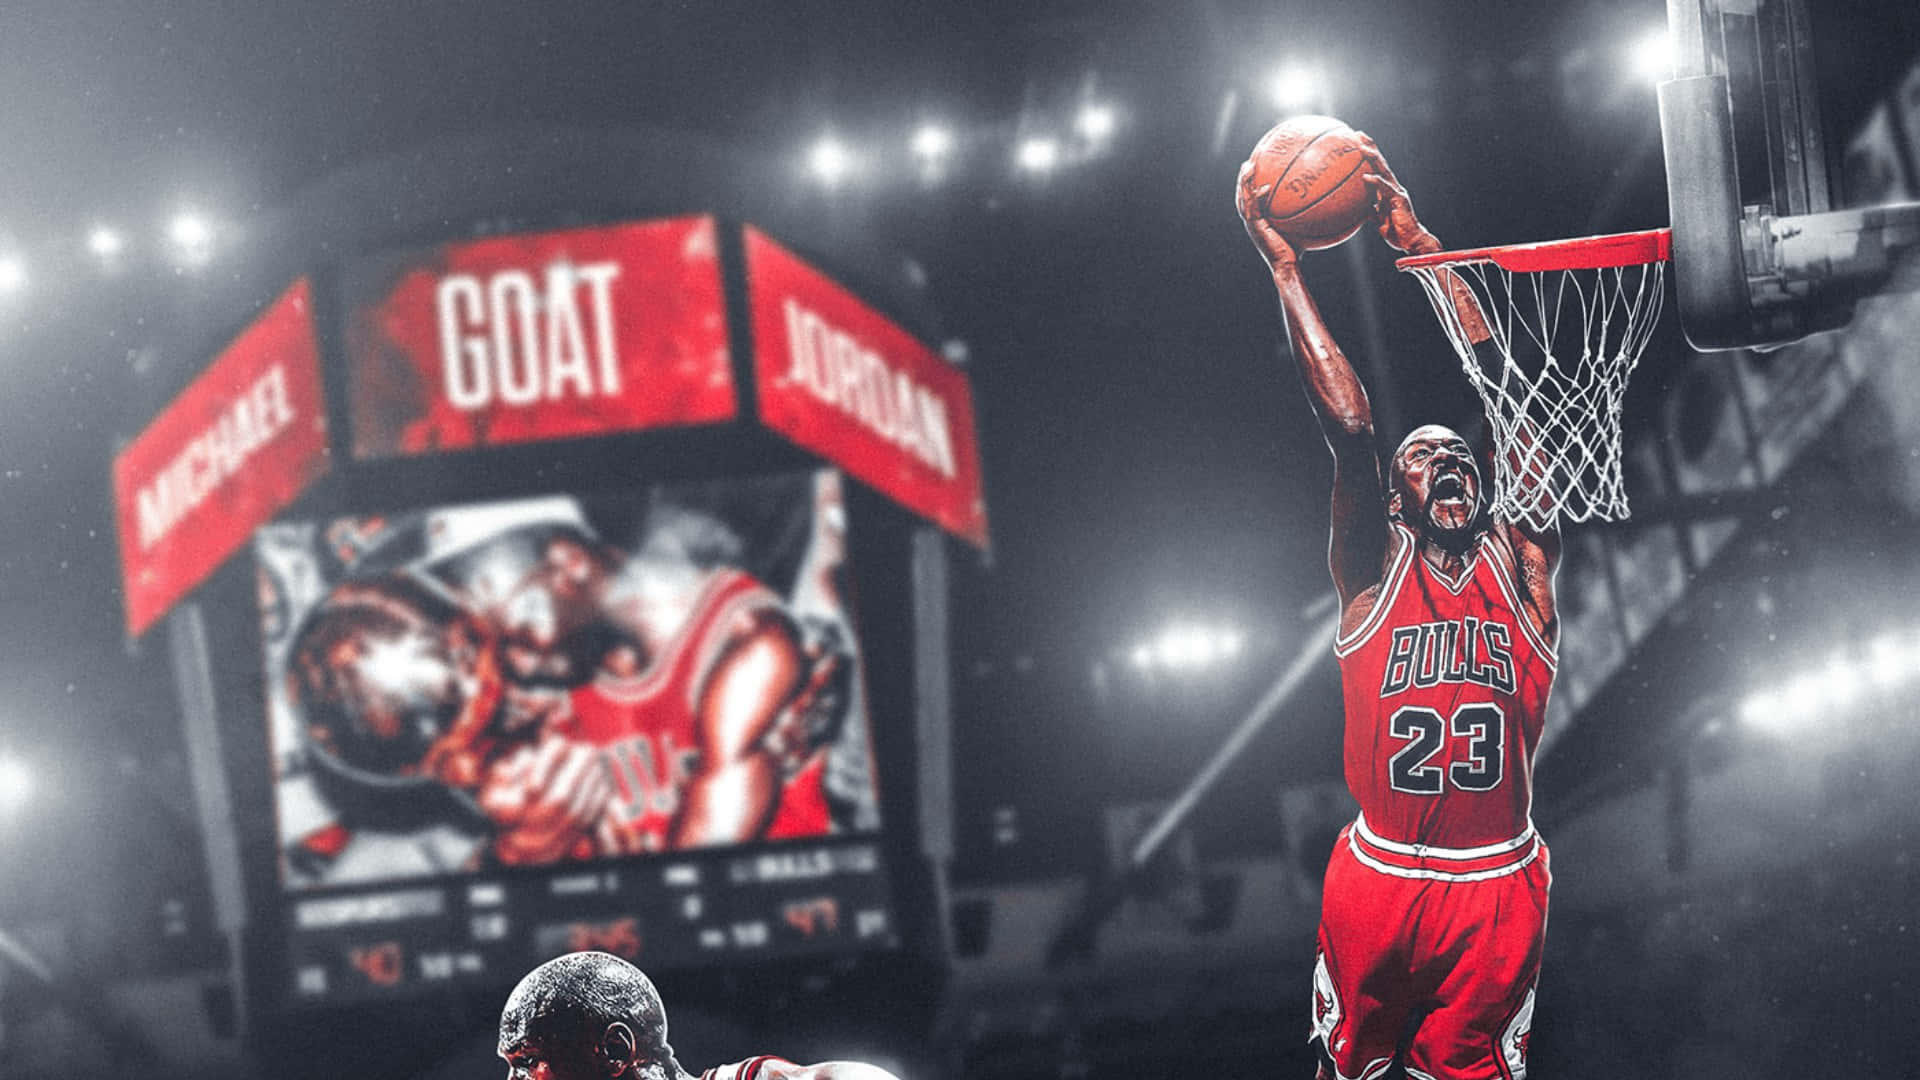 Michael Jordan, the Greatest Basketball Player of All Time